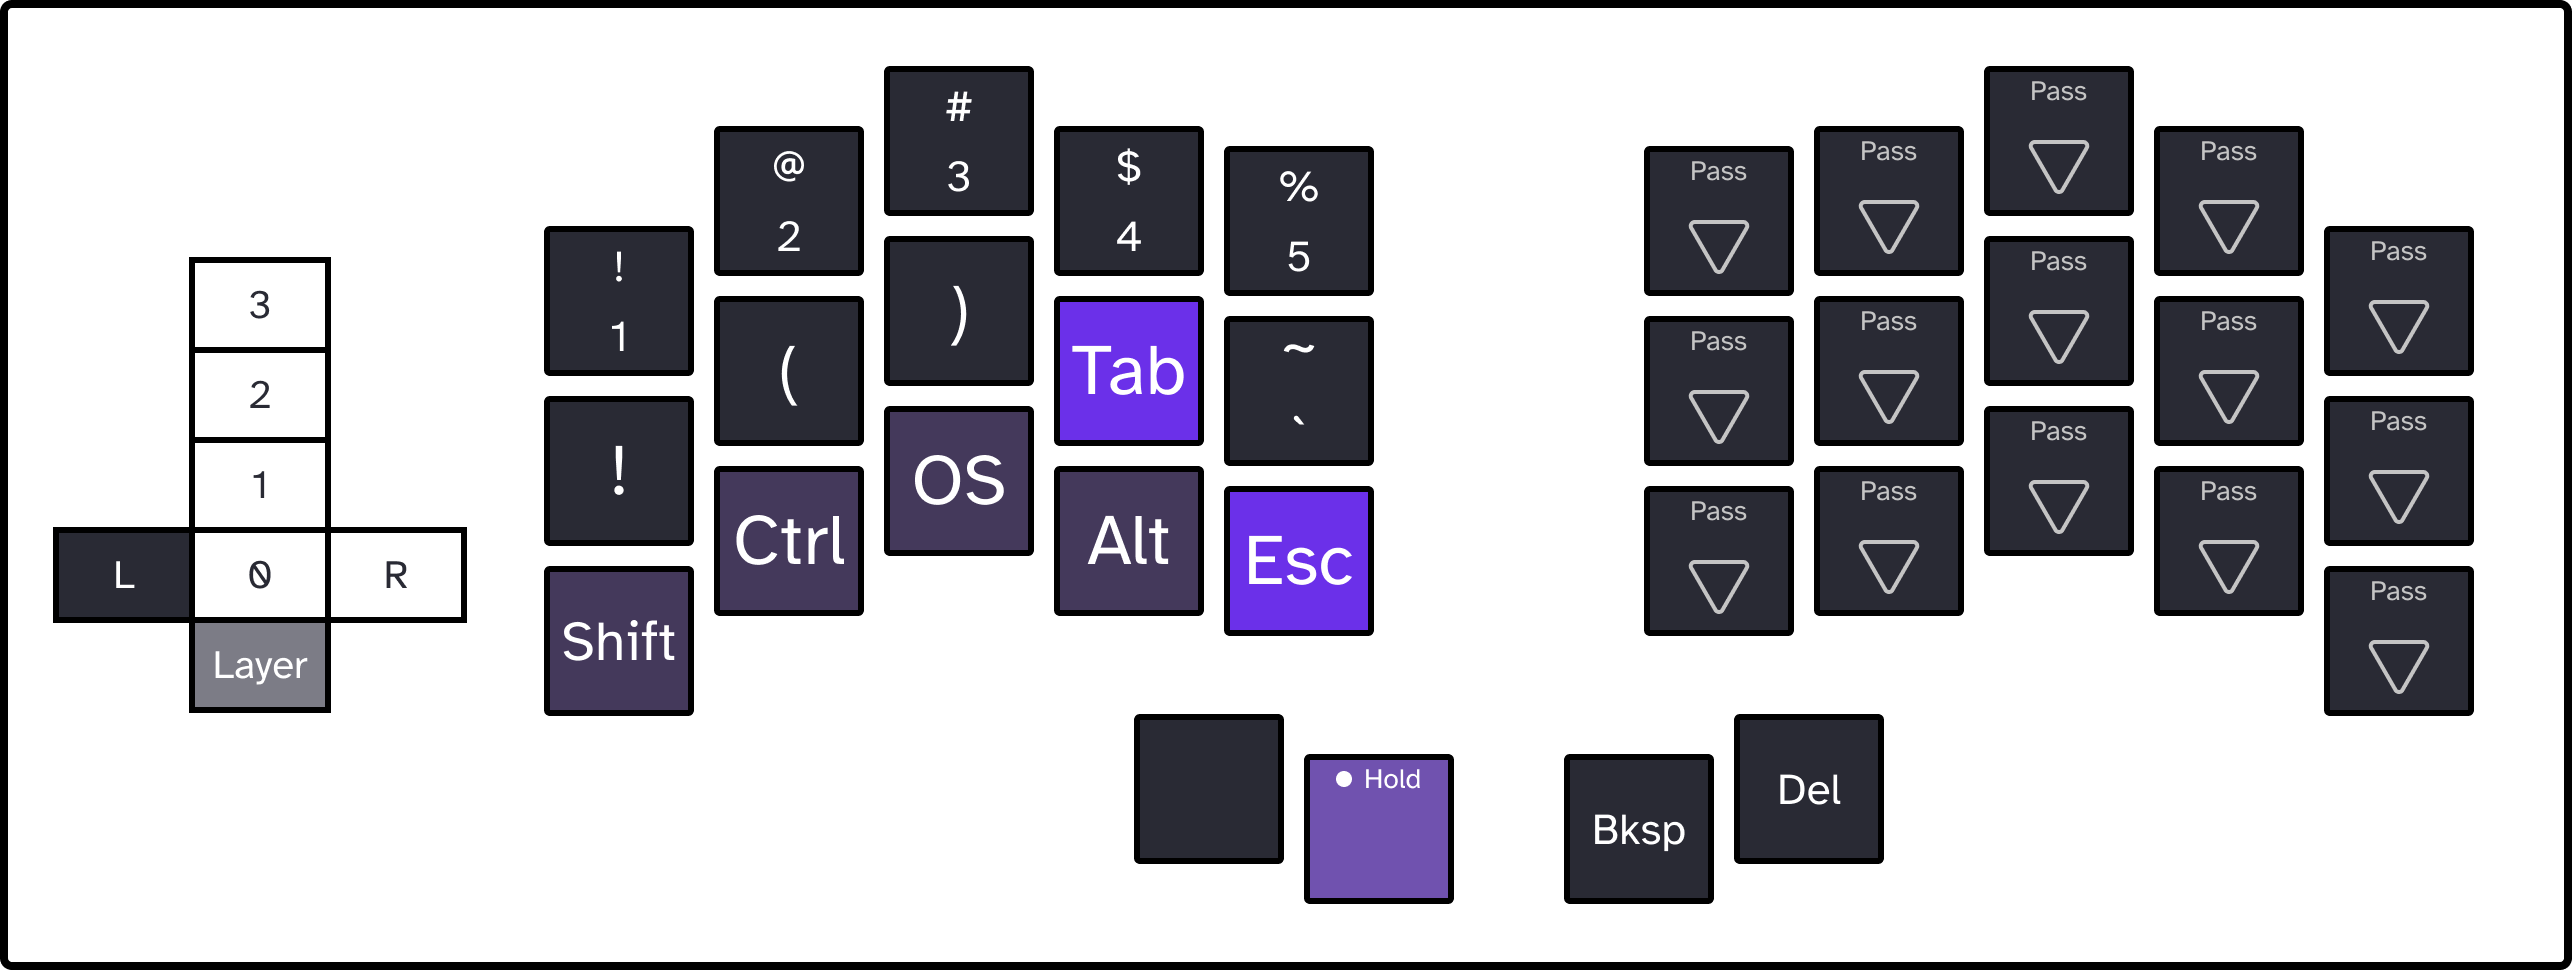 Left peek layer of my new keyboard layout for the Ferris Sweep. Keys from left to right, going down each finger from top to bottom. Left pinky: Number 1, Ampersand, Shift. Left ring: Number 2, Left Parenthesis, Control. Left middle:Number 3, Right Parenthesis, OS. Left index first column: Number 4, Tab, Alt. Left index second column: Number 5, Tilde, Escape. Left thumb 1: None (held). Left thumb 2: Pass. Right thumb 1: Backspace. Right thumb 2: Delete. Right index 2: Pass, Pass, Pass. Right index 1: Pass, Pass, Pass. Right middle: Pass, Pass, Pass. Right ring: Pass, Pass, Pass. Right pinky: Pass, Pass, Pass.